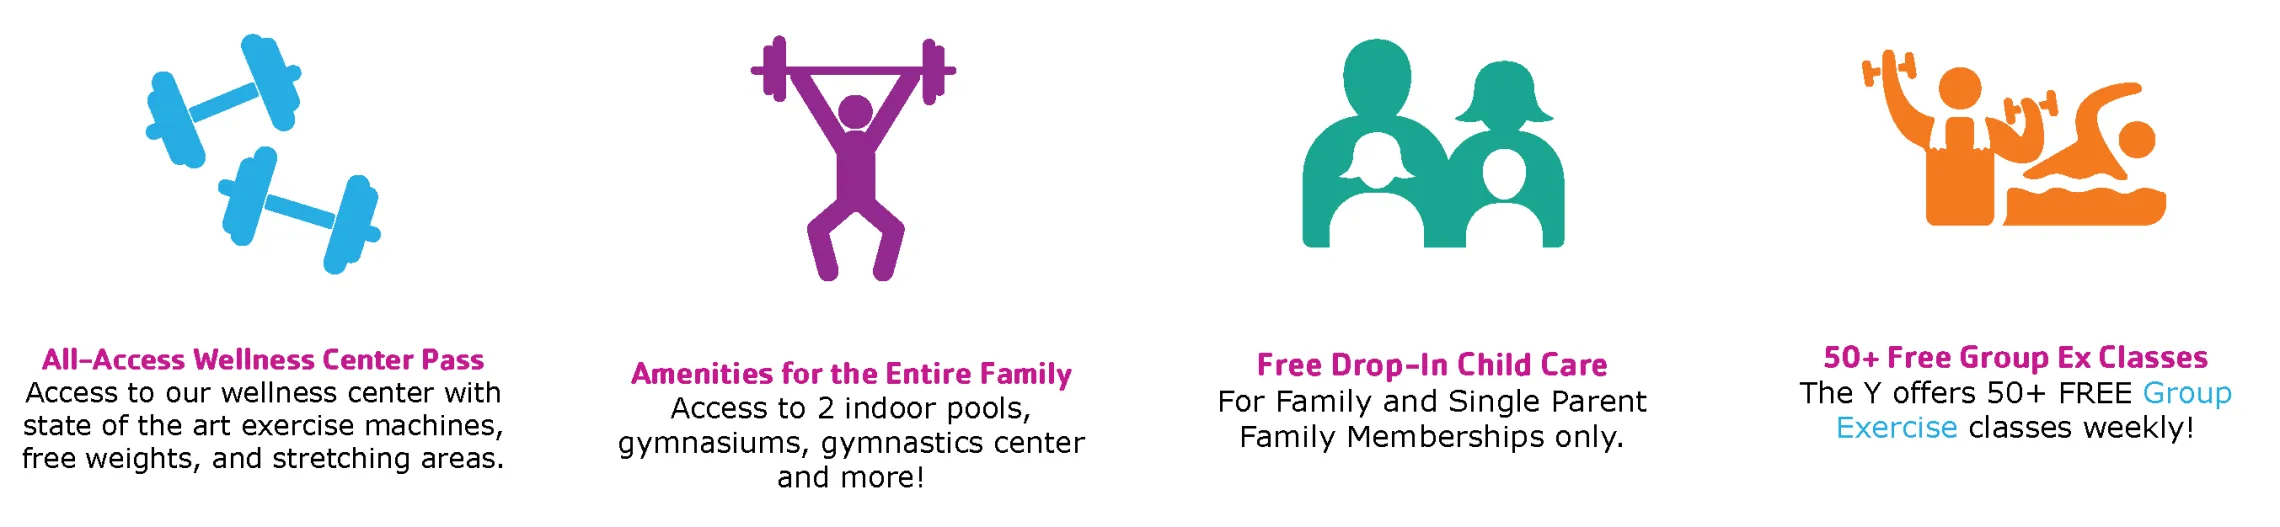 All-Access Wellness Center Pass, Amenities for the entire family, free drop-in child care, 50+ free group ex classes